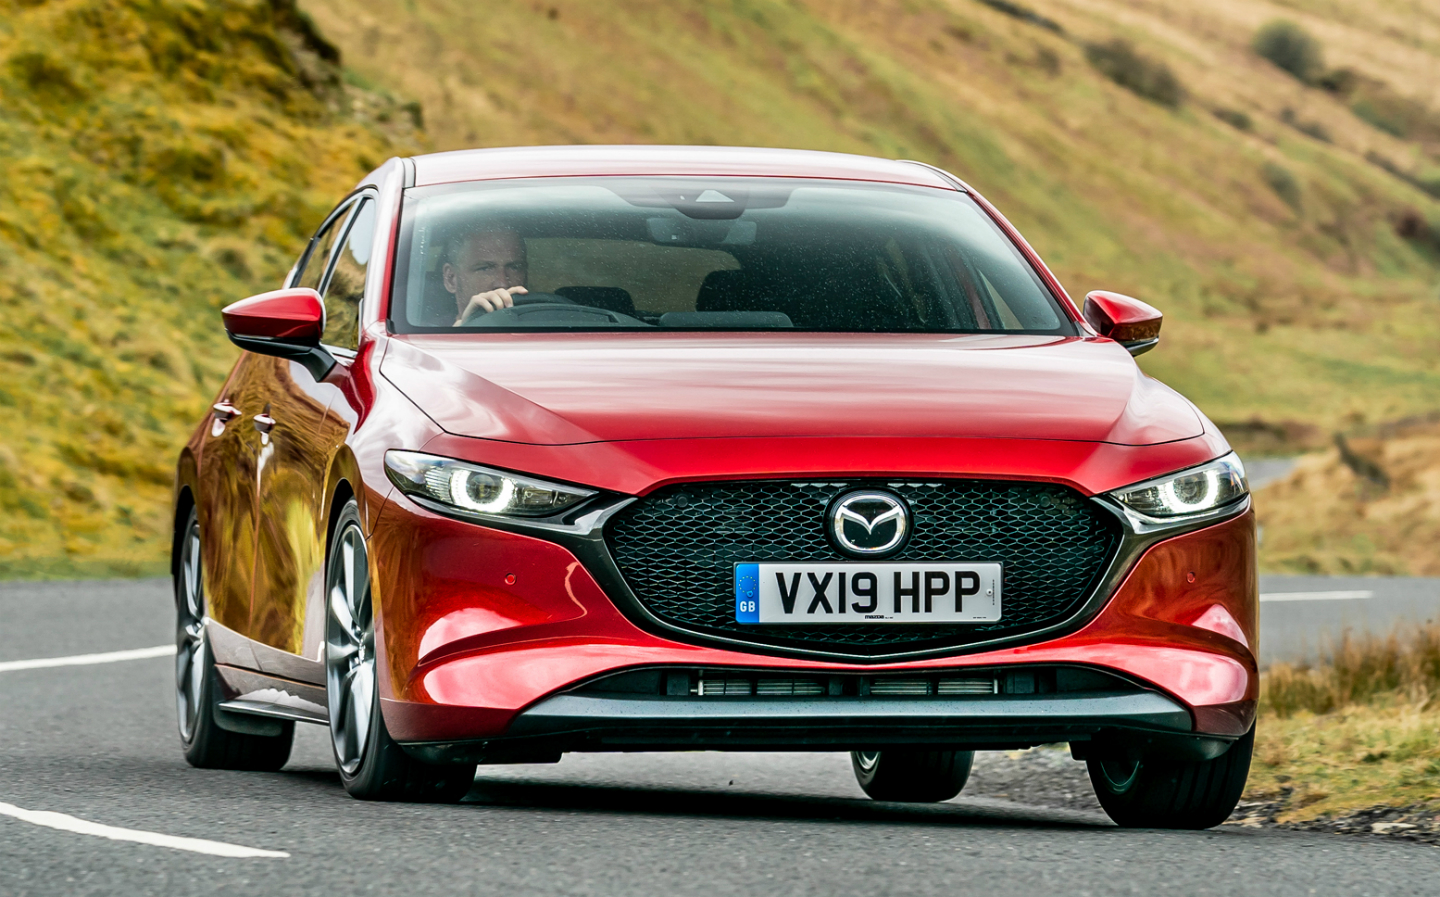 Sunday Times Motor Awards 2019: Best Citycar and Small Car of the Year. Mazda3